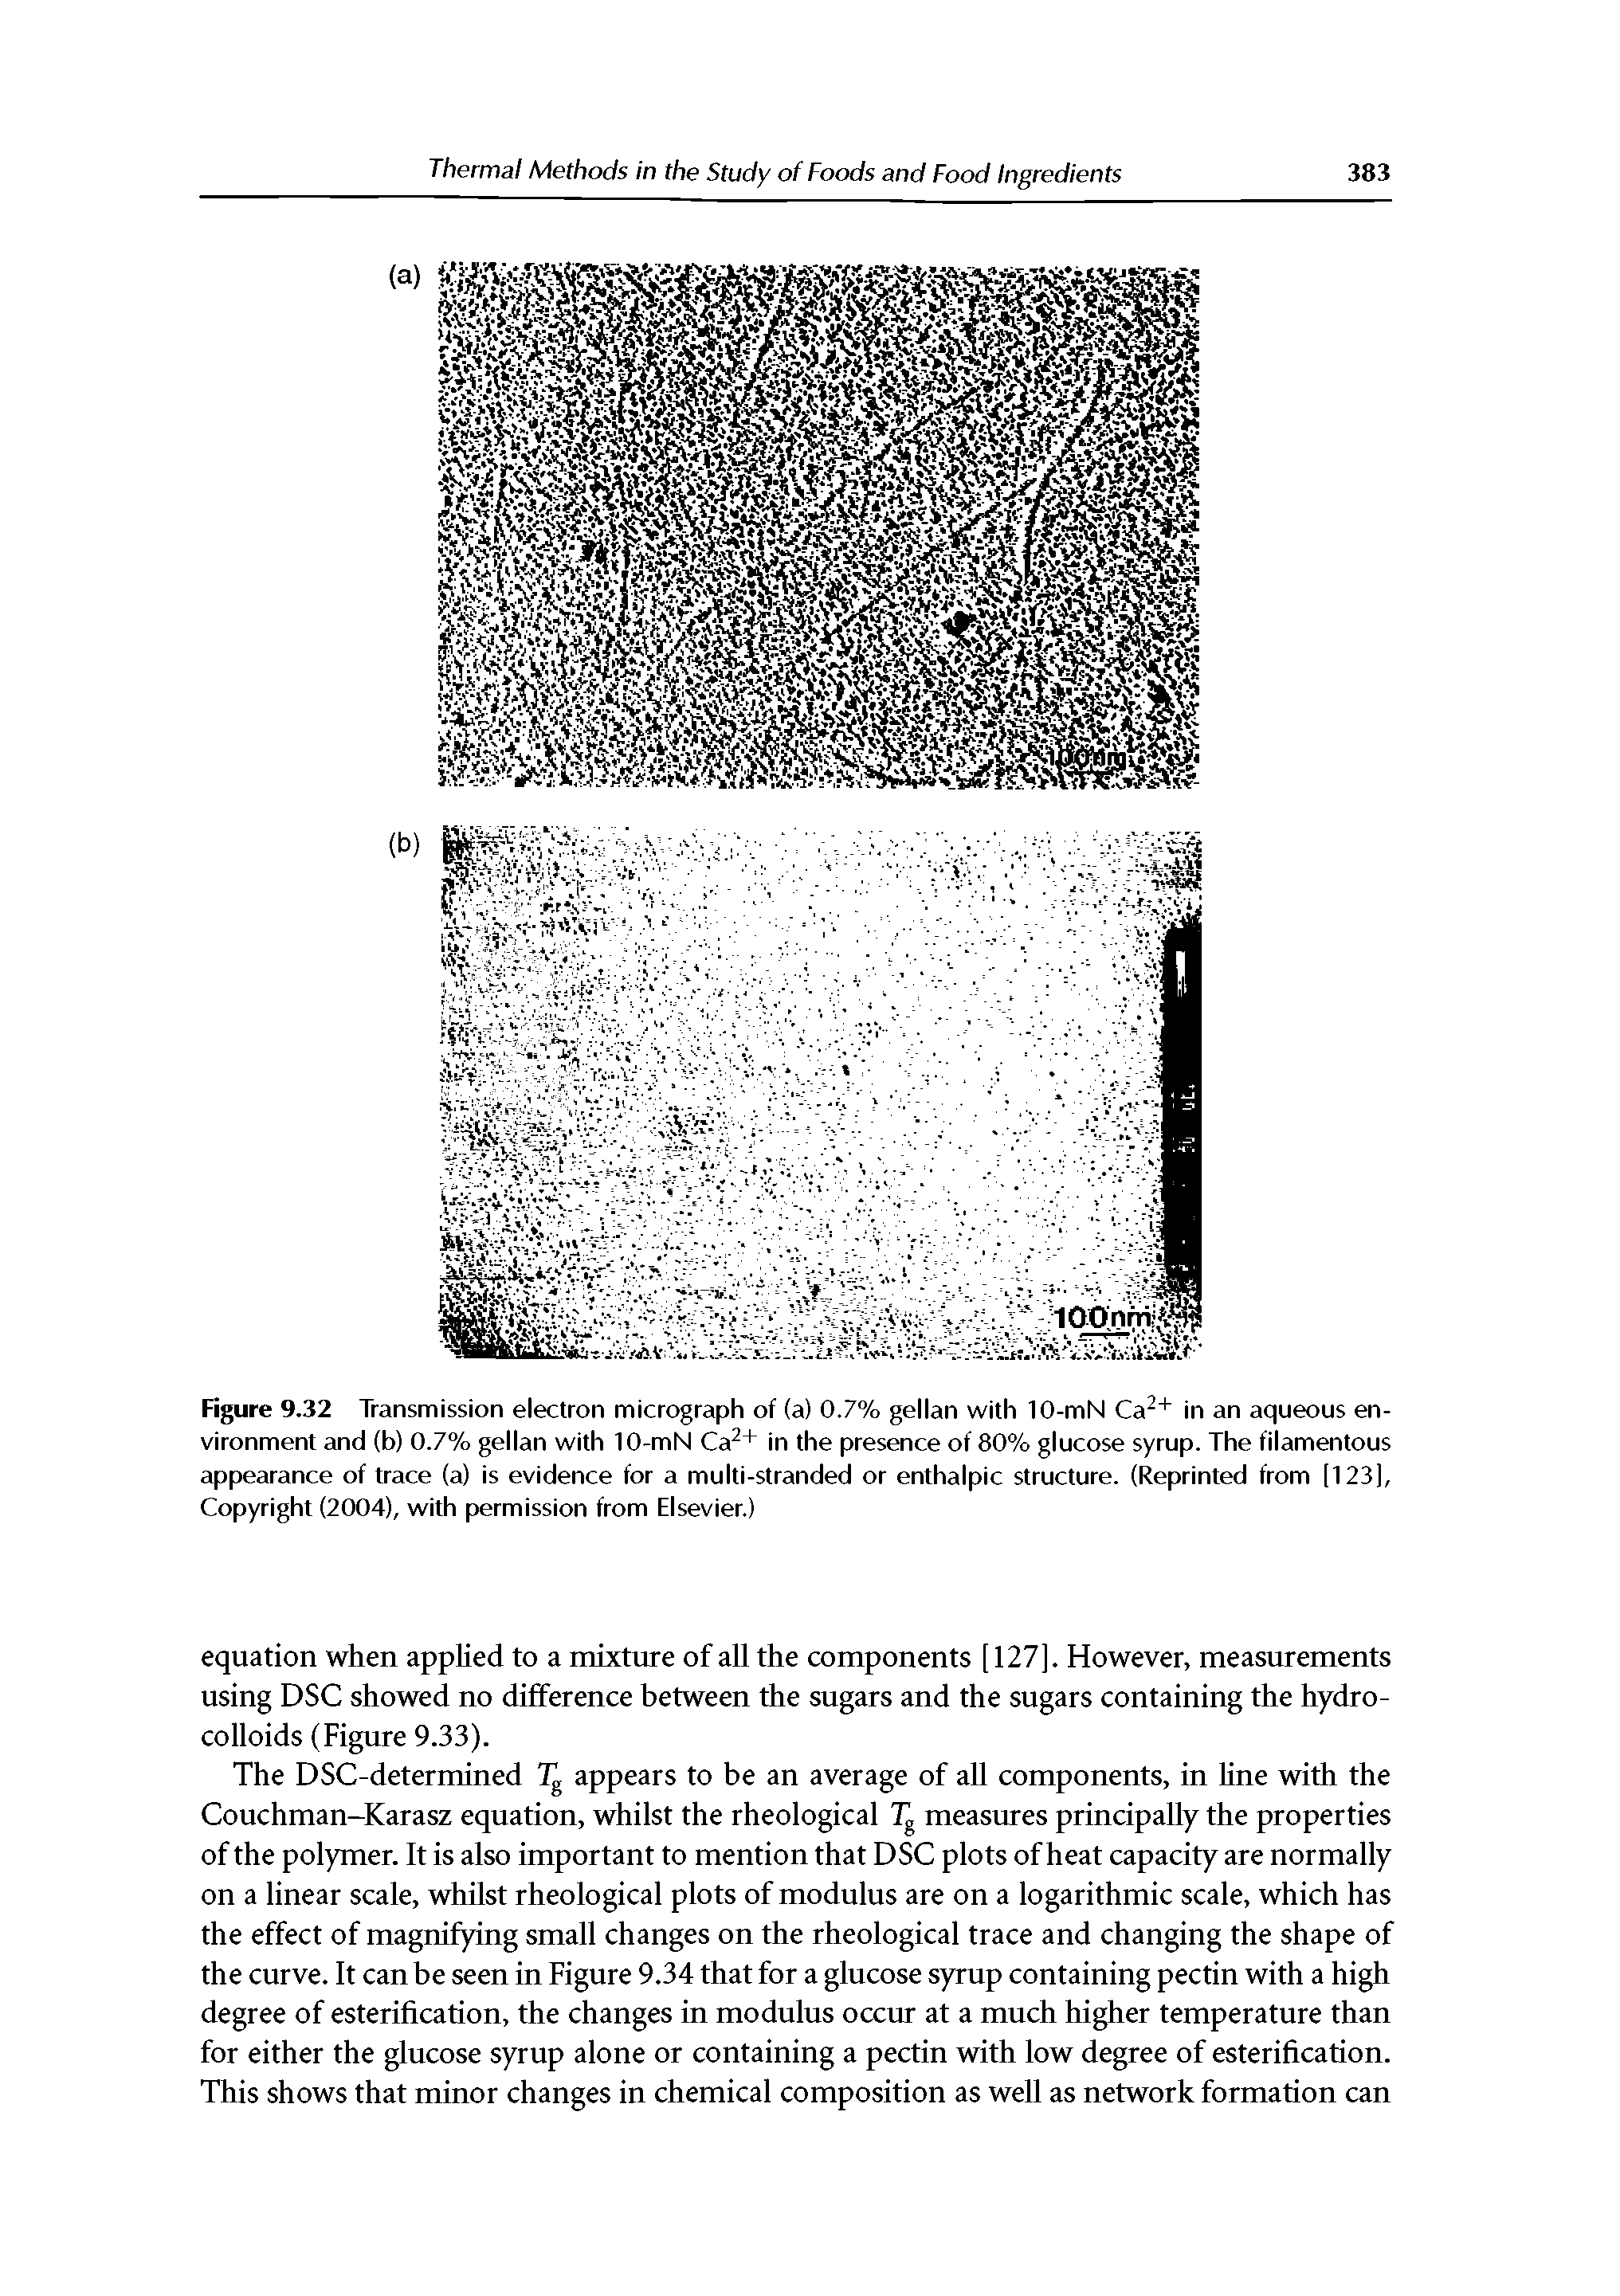 Figure 9.32 Transmission electron micrograph of (a) 0.7% gellan with 10-mN Ca " in an aqueous environment and (b) 0.7% gellan with 10-mN Ca + in the presence of 80% glucose syrup. The filamentous appearance of trace (a) is evidence for a multi-stranded or enthalpic structure. (Reprinted from [123], Copyright (2004), with permission from Elsevier.)...